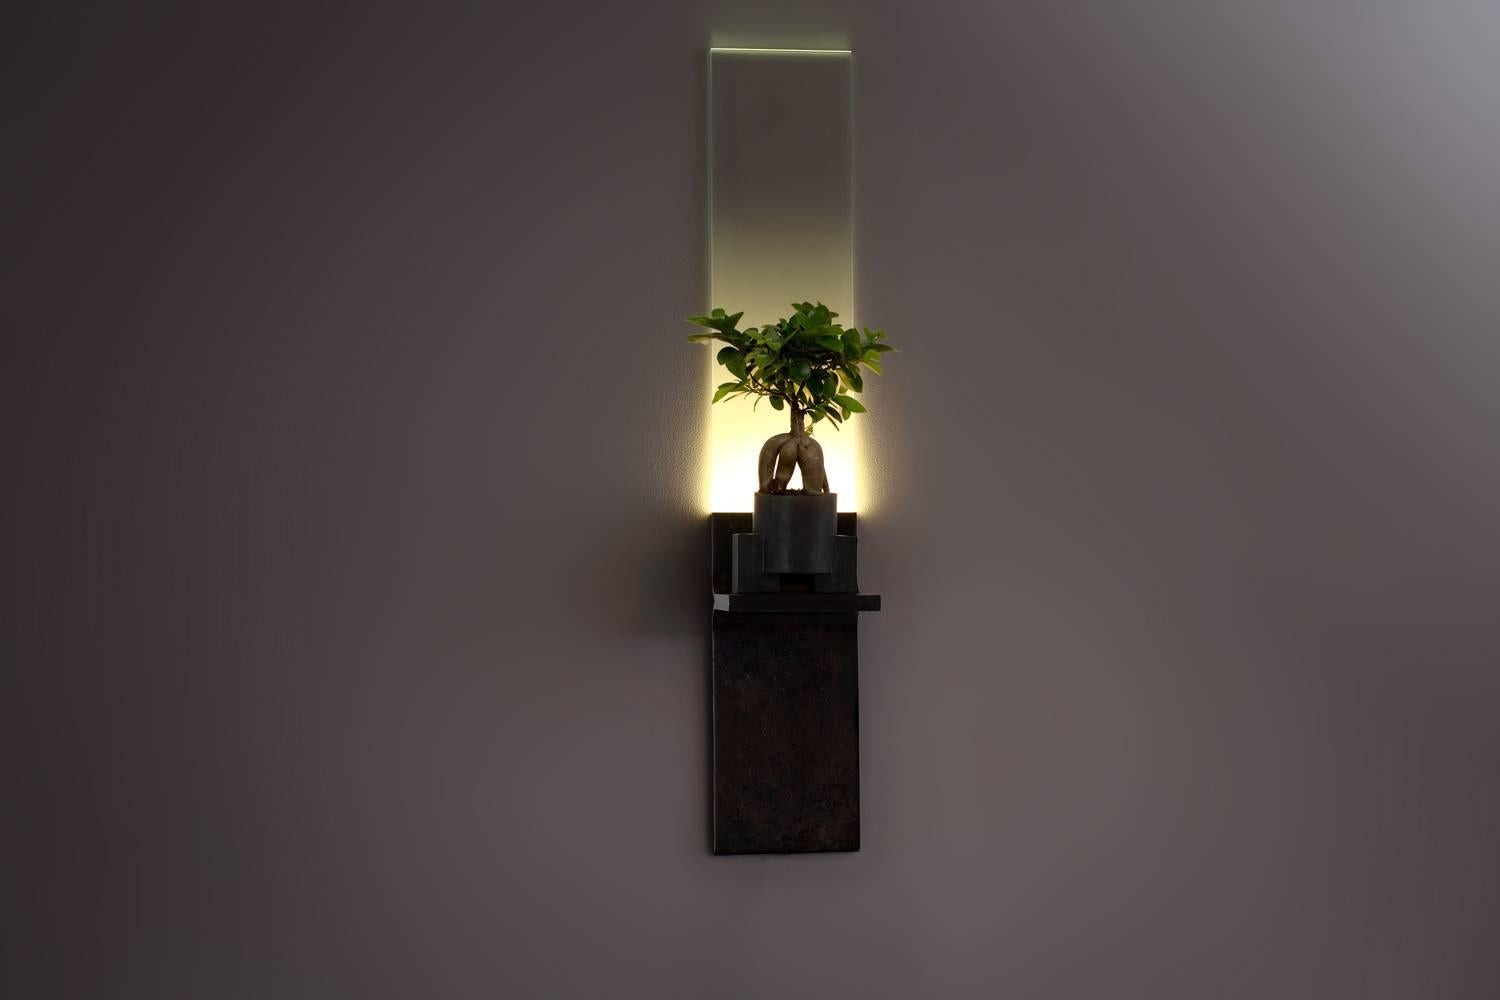 The monolith, brass LED light plant grower, Luvere Studio
Materials: Cold ? ?rolled ? ?steel, ? ?starfire ? ?glass, ? ?LED ? ?lighting
Dimensions: 37” ? ?x ? ?7” ? ?x ? ?7”

The monolith is a wall-mounted, full-spectrum LED light fixture